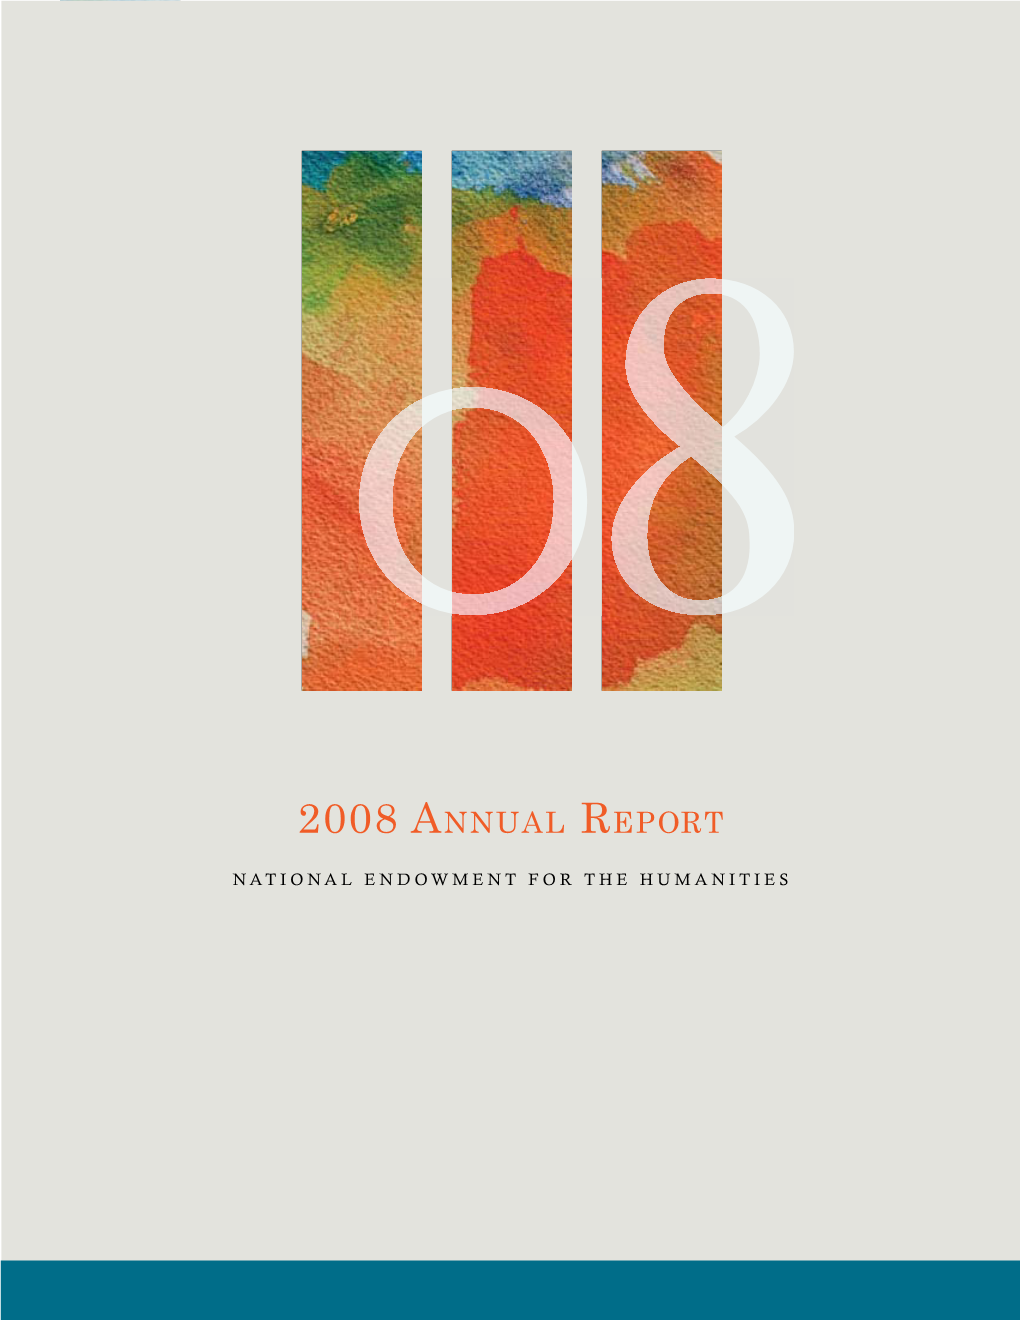 2008 Annual Report of the National Endowment for the Humanities